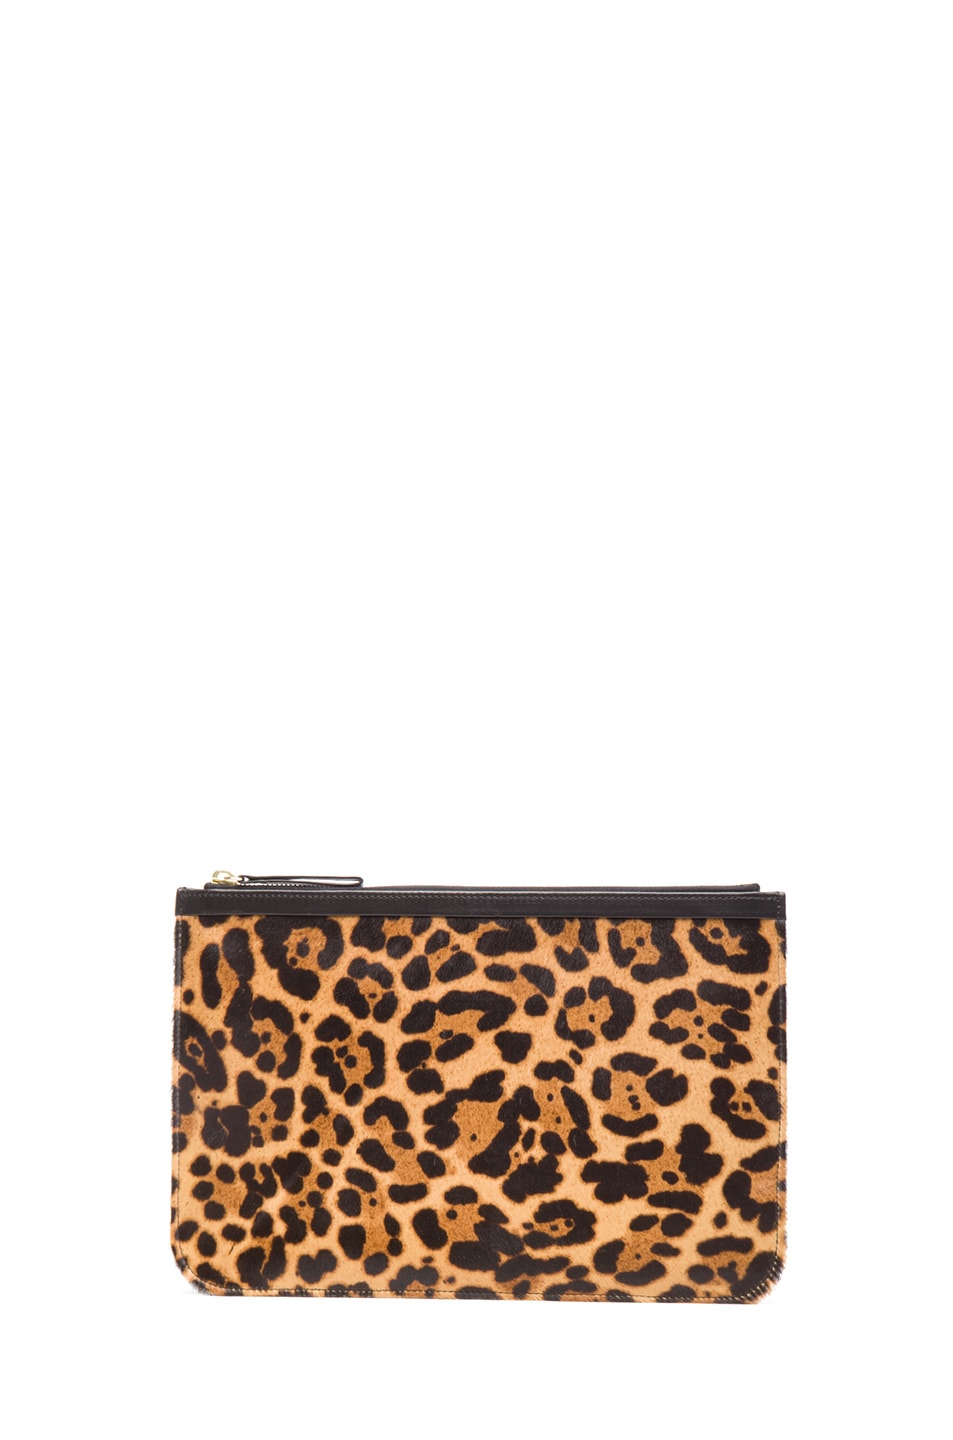 Pierre Hardy Large Leopard Calf Hair Pouch in Natural & Black | FWRD